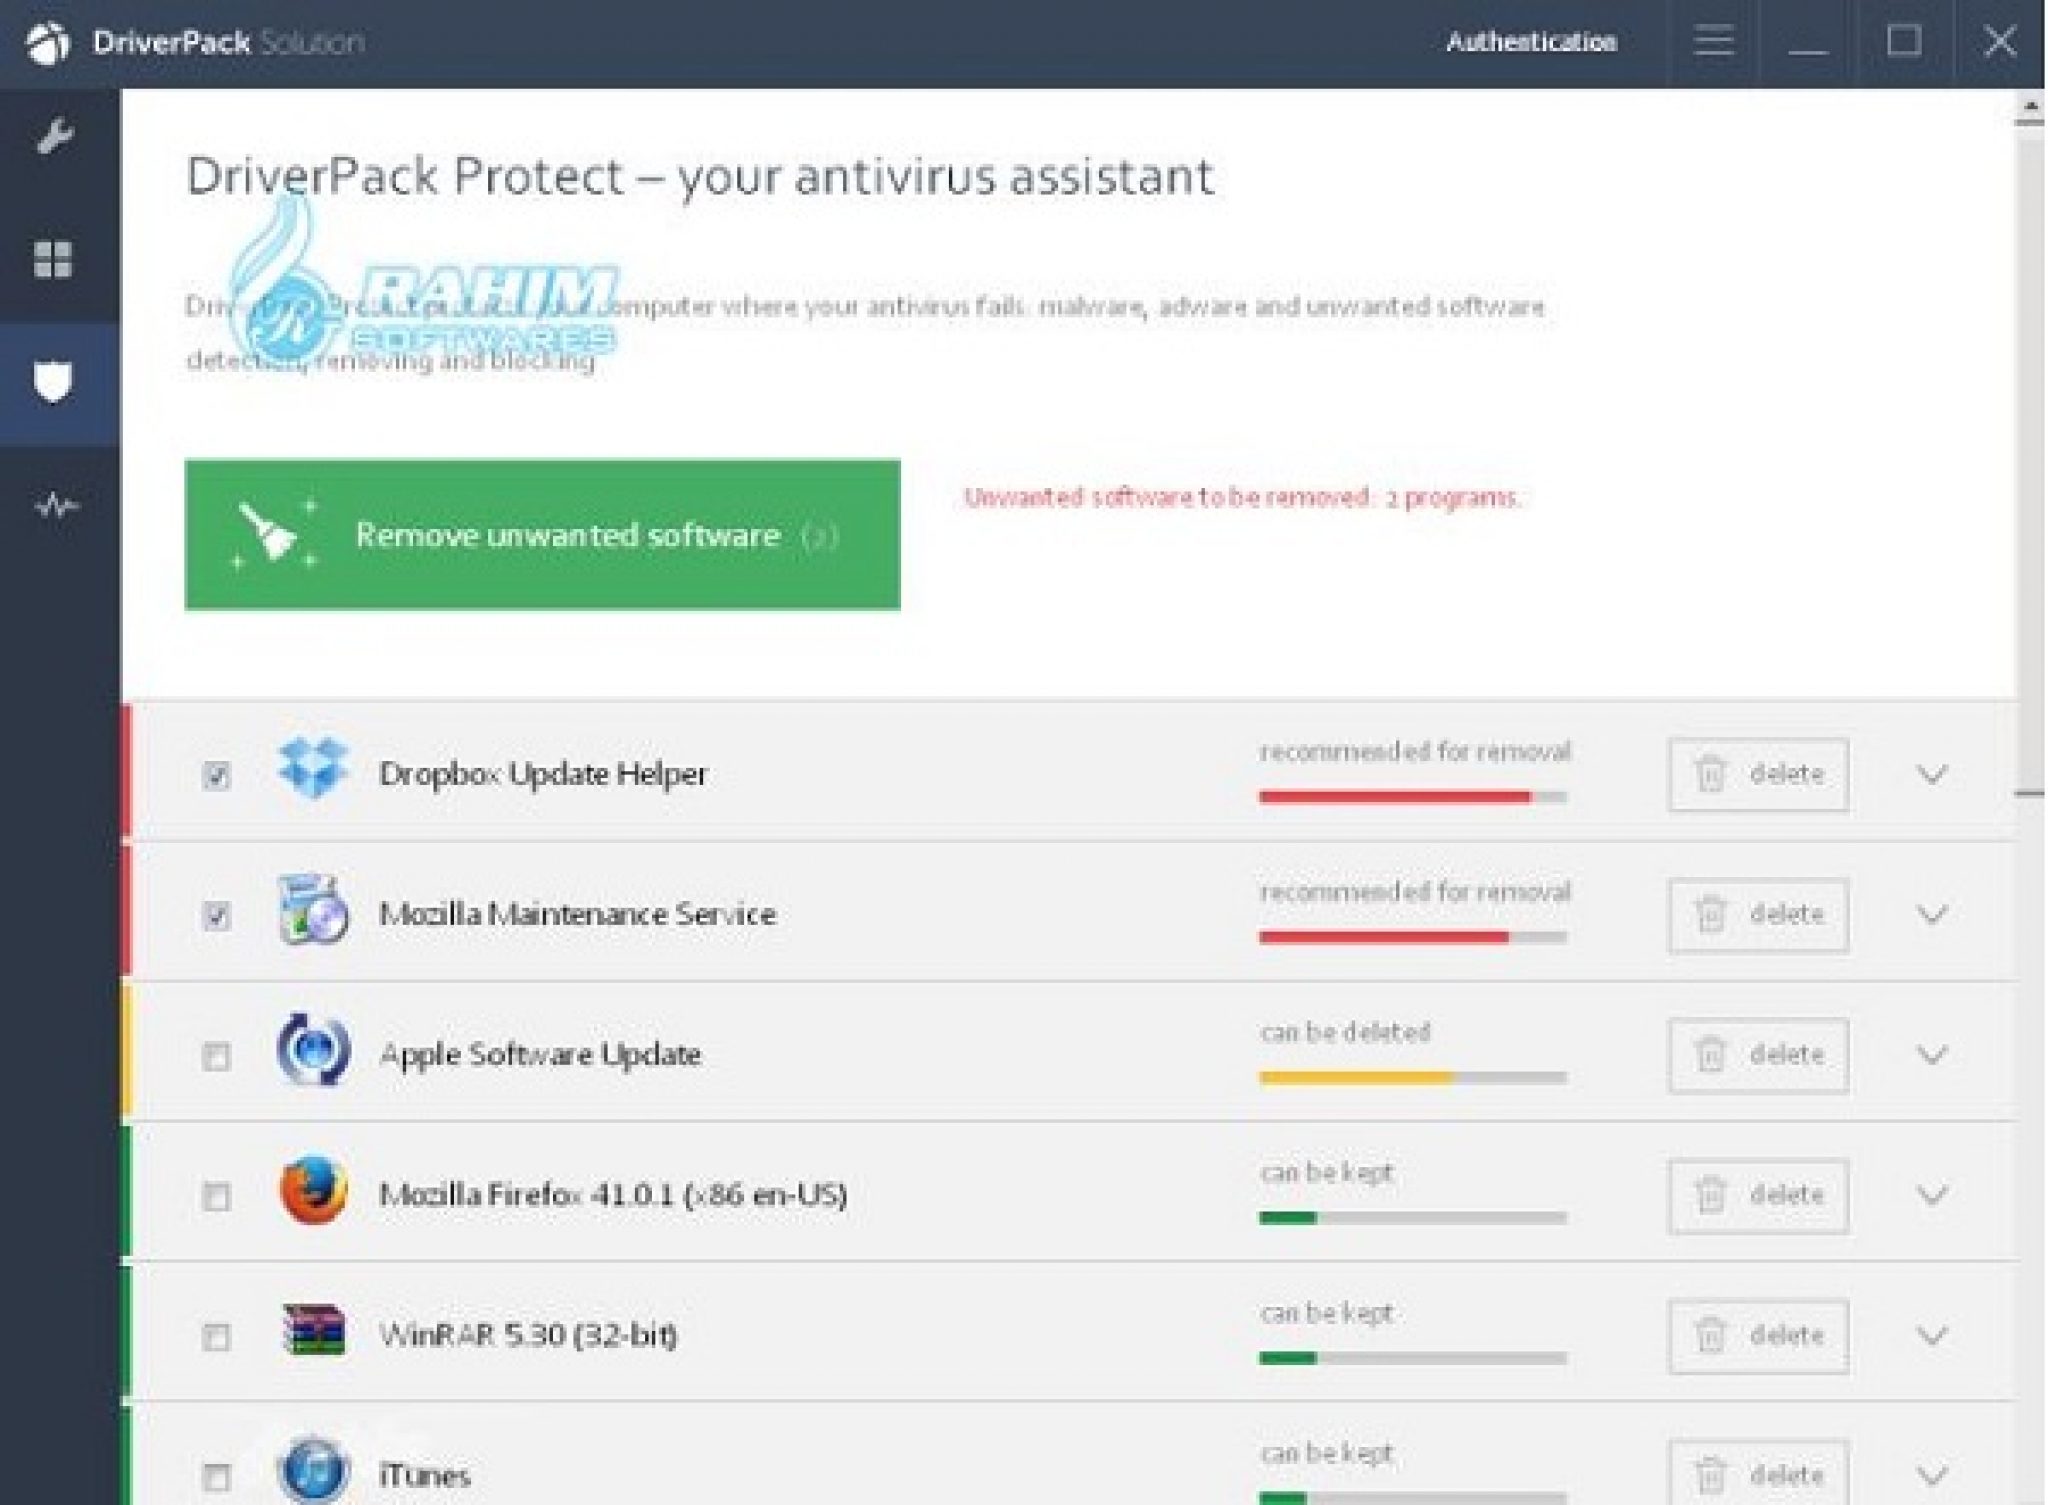 driverpack solution 12.0 free download